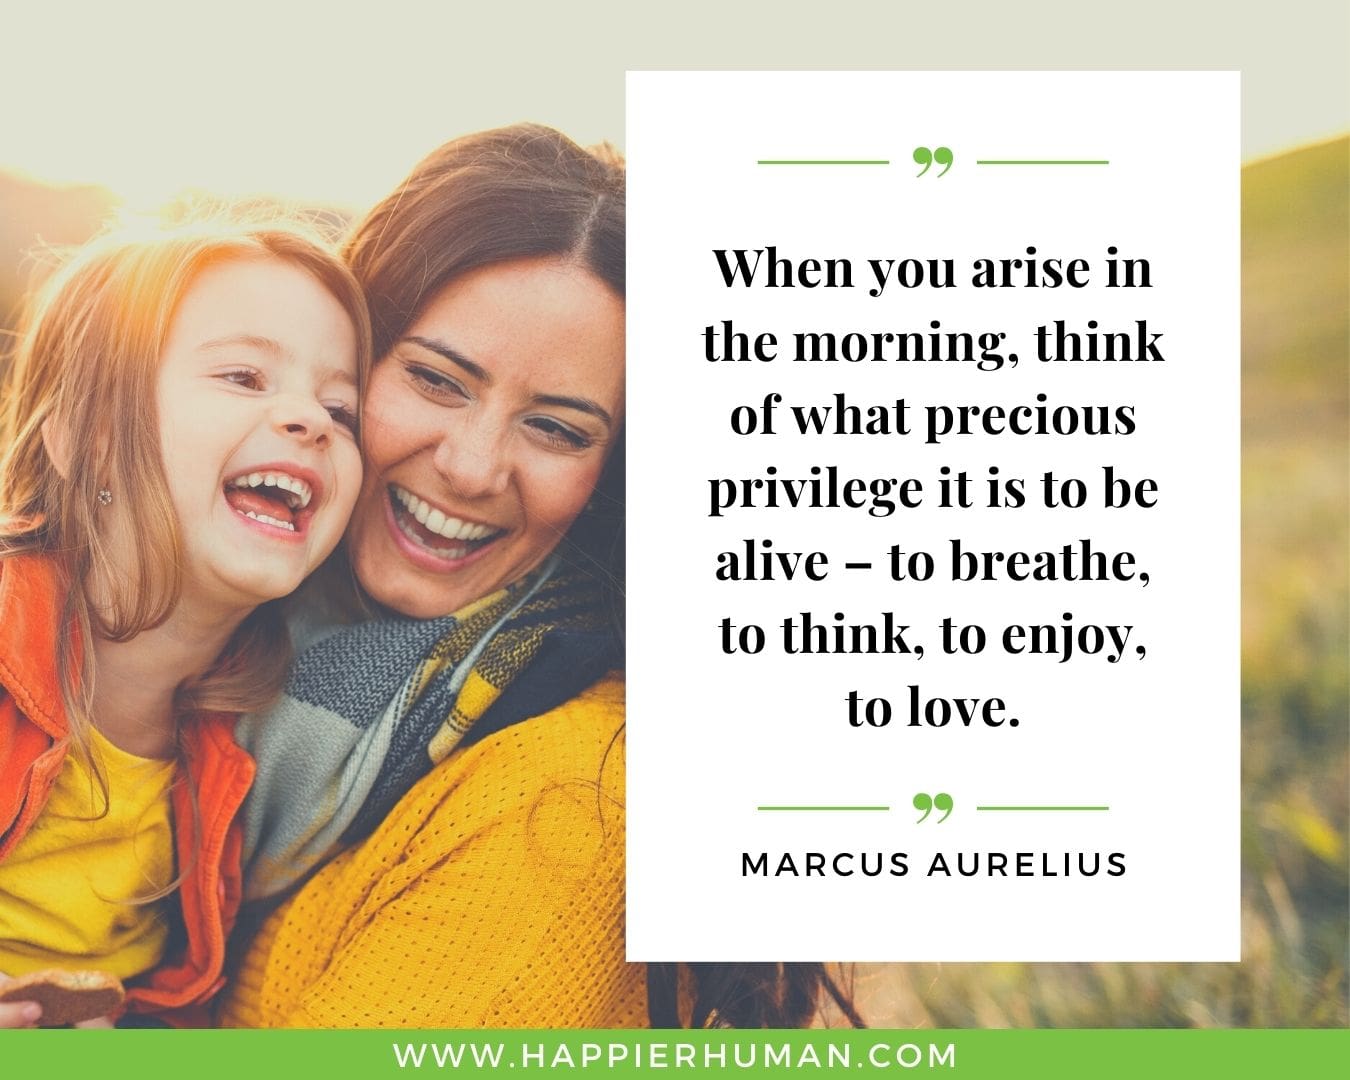 Positive Energy Quotes - “When you arise in the morning, think of what precious privilege it is to be alive - to breathe, to think, to enjoy, to love.” - Marcus Aurelius